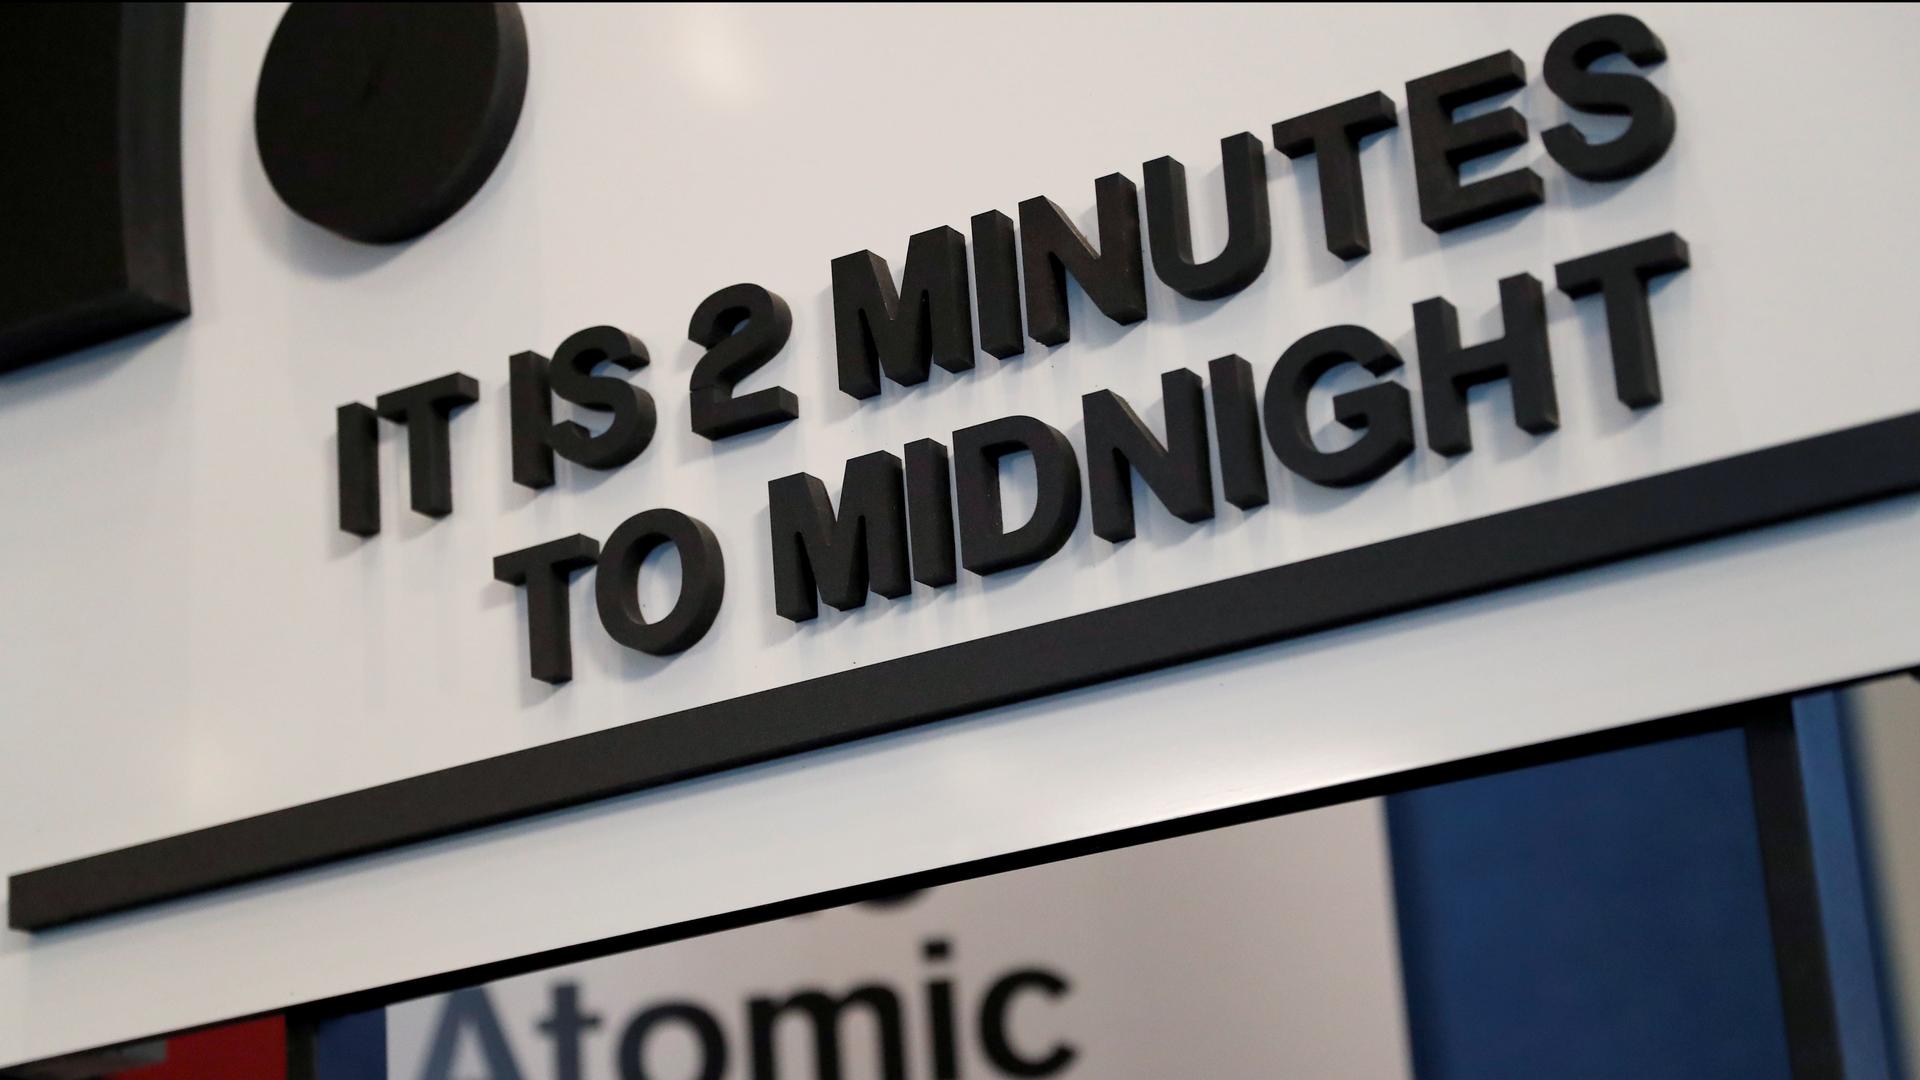 A sign reads: "It's 2 minutes to midnight"